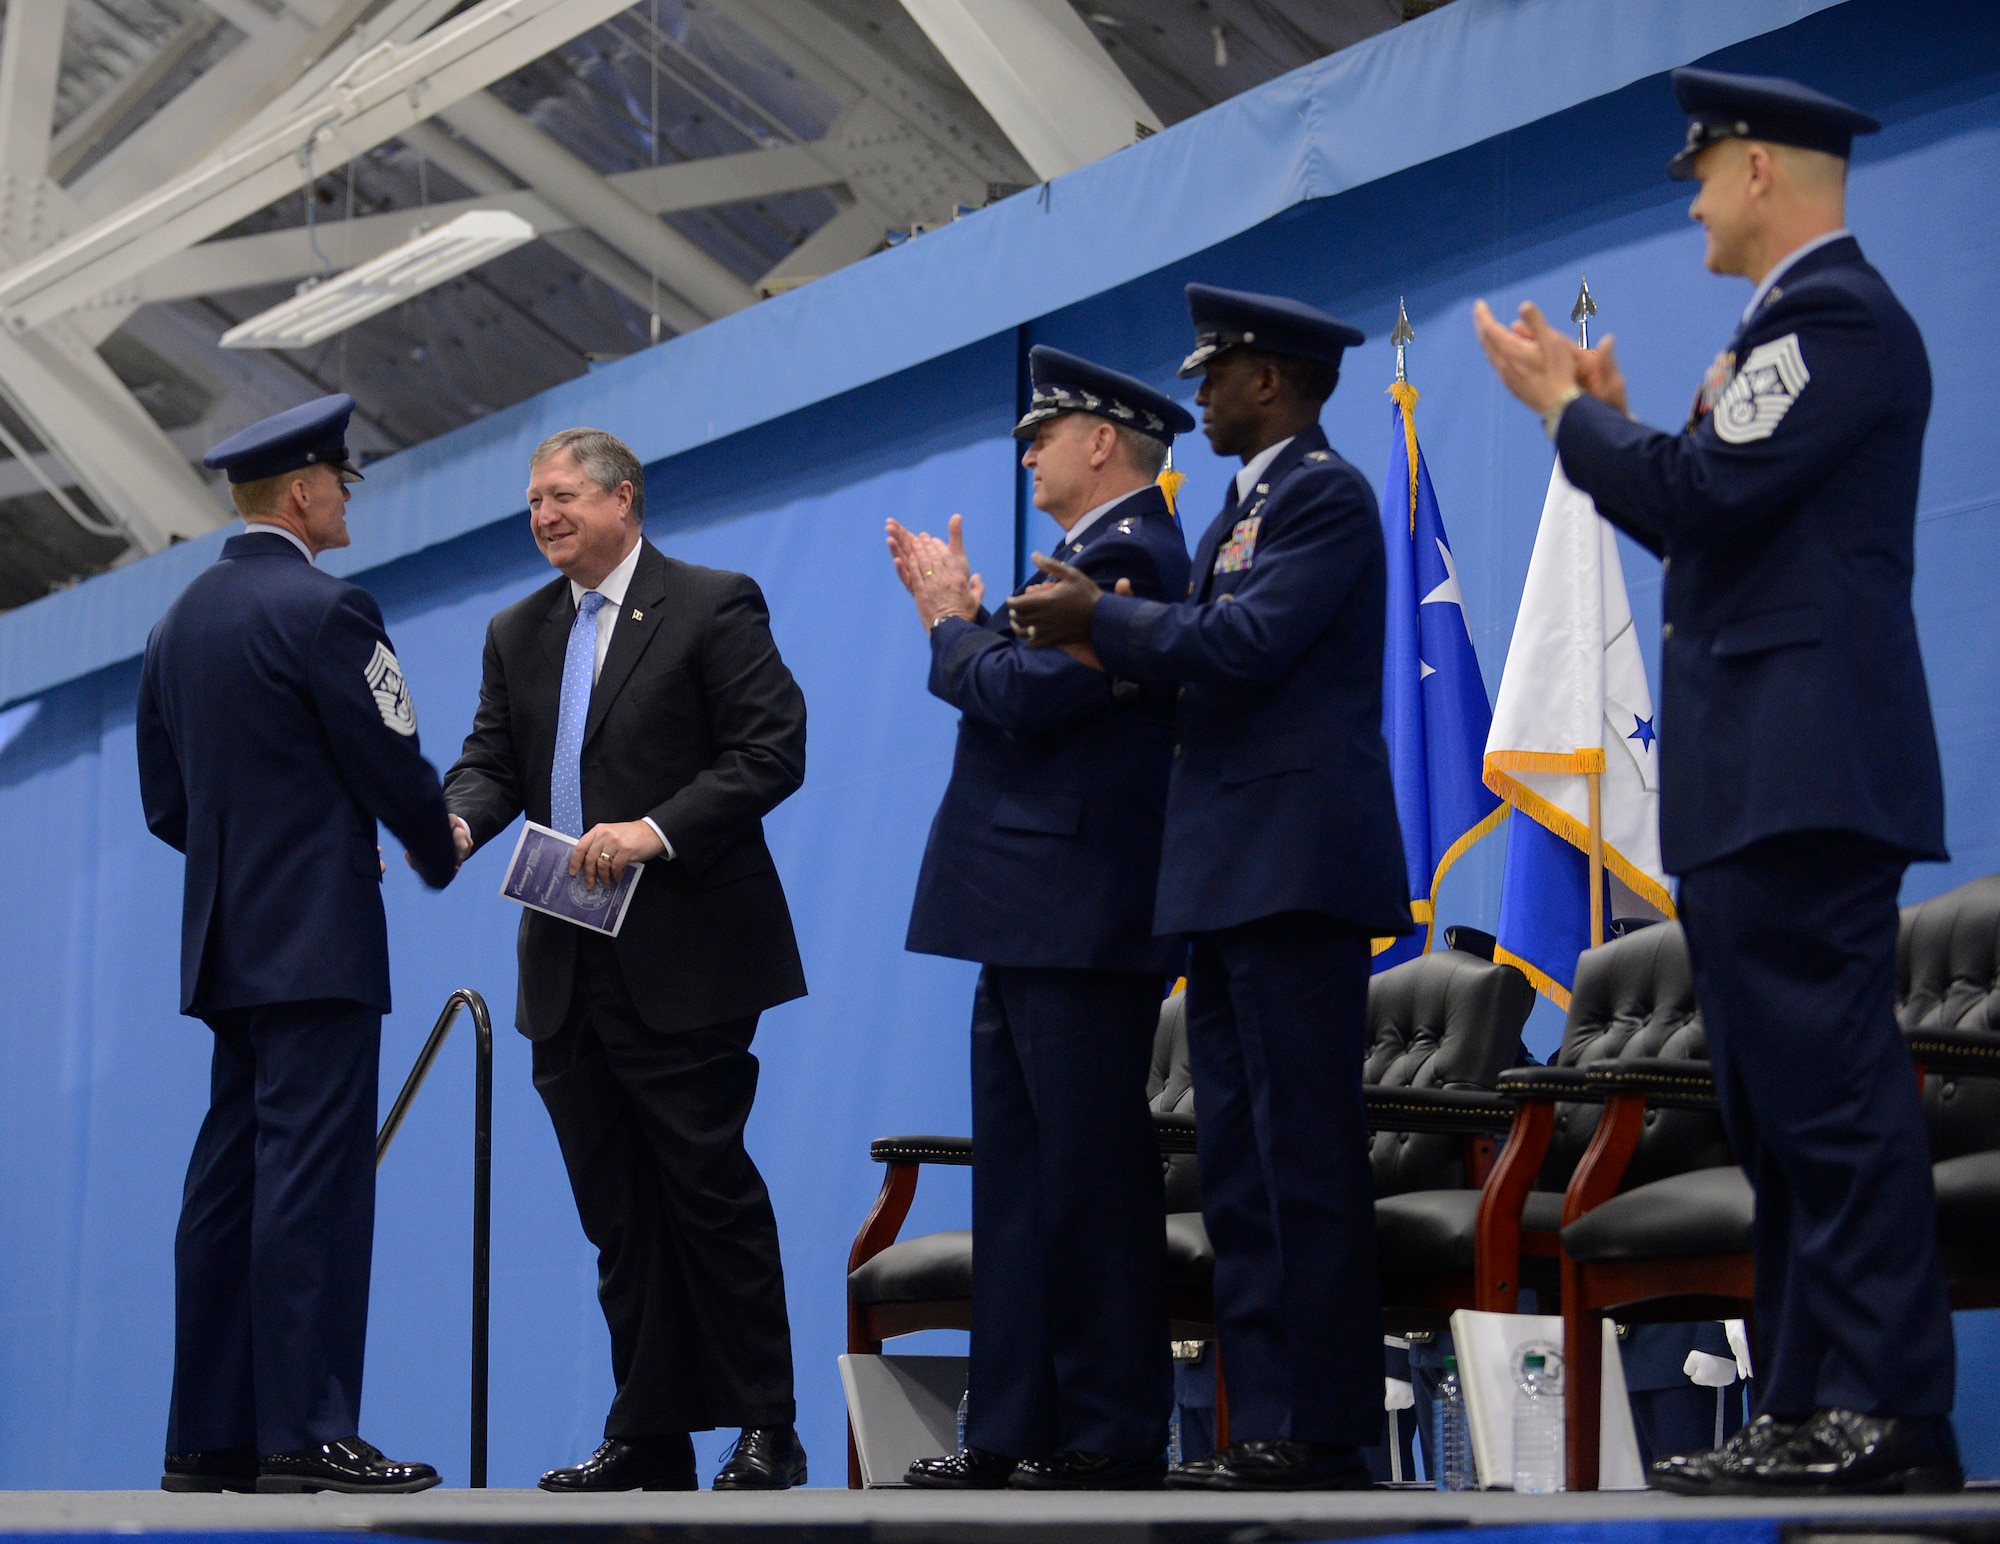 Secretary of the Air Force Michael Donley congratulates the newly appointed 17th Chief Master Sgt. of the Air Force James Cody during a retirement and transition ceremony on Joint Base Andrews, Md. on Jan. 24, 2013. Donley also bid farewell to Chief Master Sgt. of the Air Force James Roy who retired after more than 30 years of service. (U.S. Air Force photo/Jim Varhegyi)